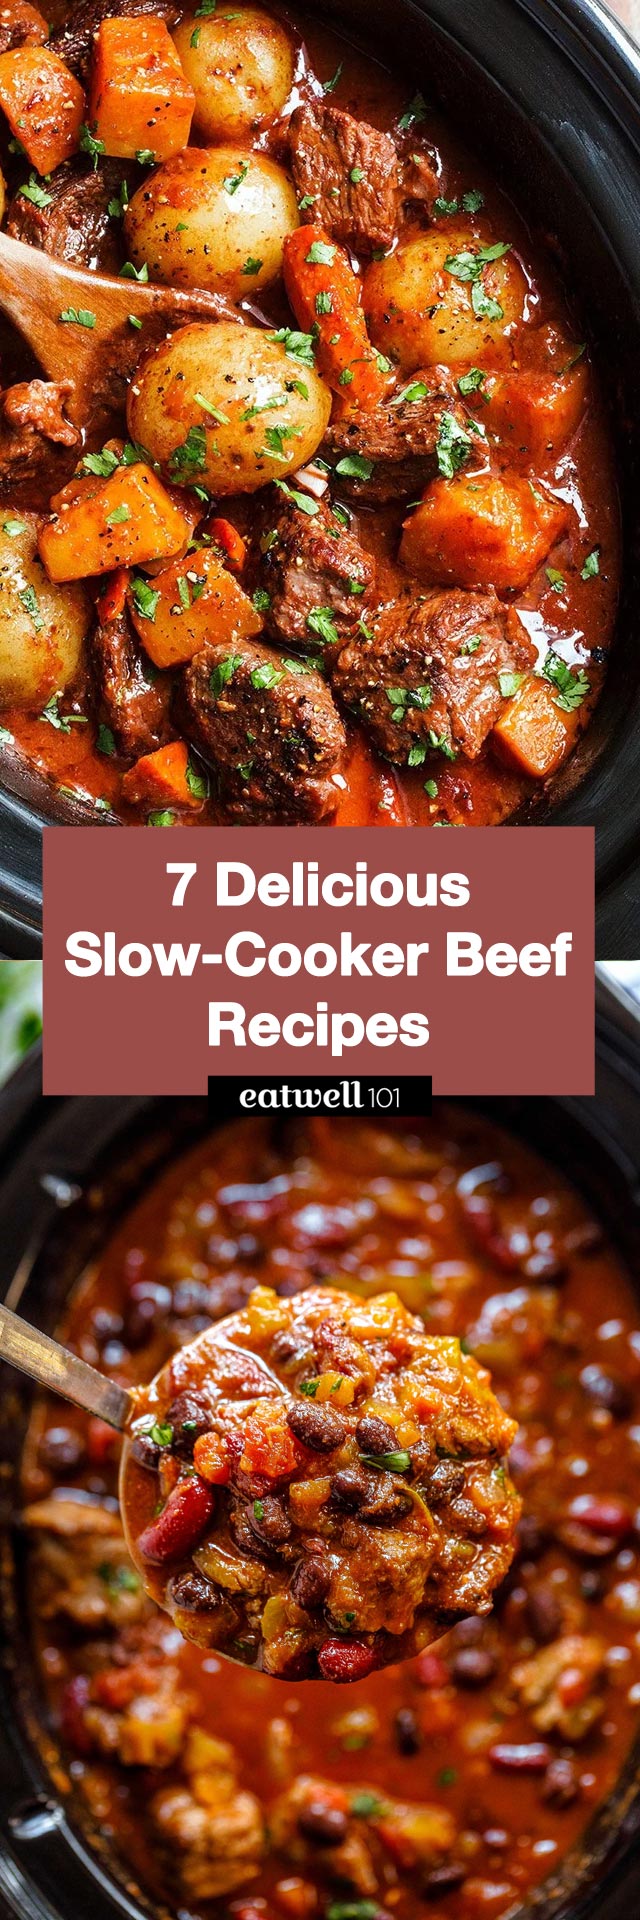 7 Delicious Slow-Cooker Beef Recipes for Winter - #slowcooker #beef #recipes #eatwell101 - For delicious, hearty slow cooker beef recipes, look no further! With our Crockpot beef recipes, you can create flavorful dishes without too much effort, so get cooking!